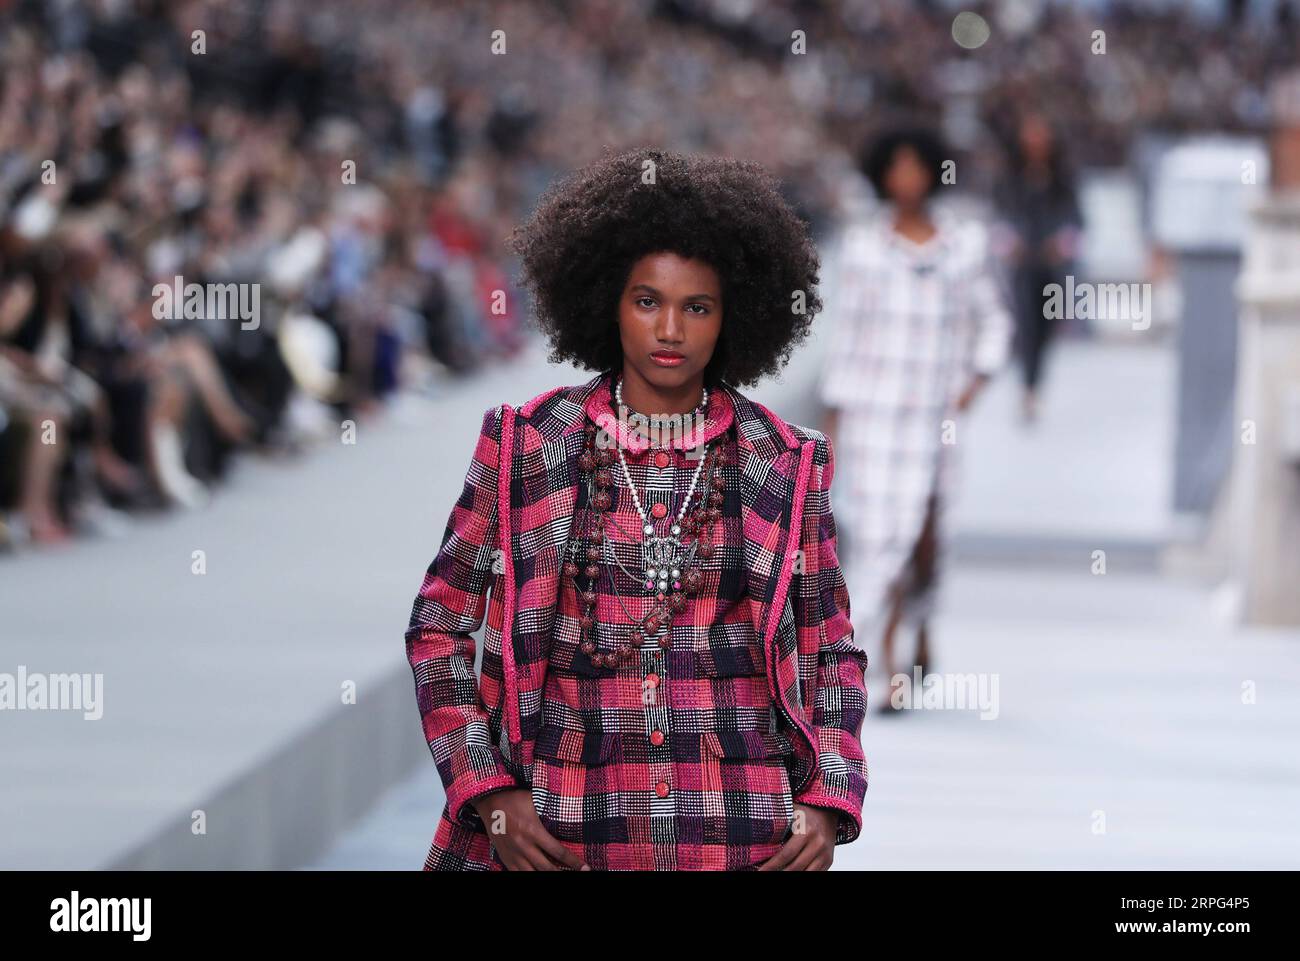 191002 -- PARIS, Oct. 2, 2019 -- A model presents creations of French  fashion house Chanel as part of its Spring/Summer 2020 women s  ready-to-wear collection show during Paris Fashion Week in